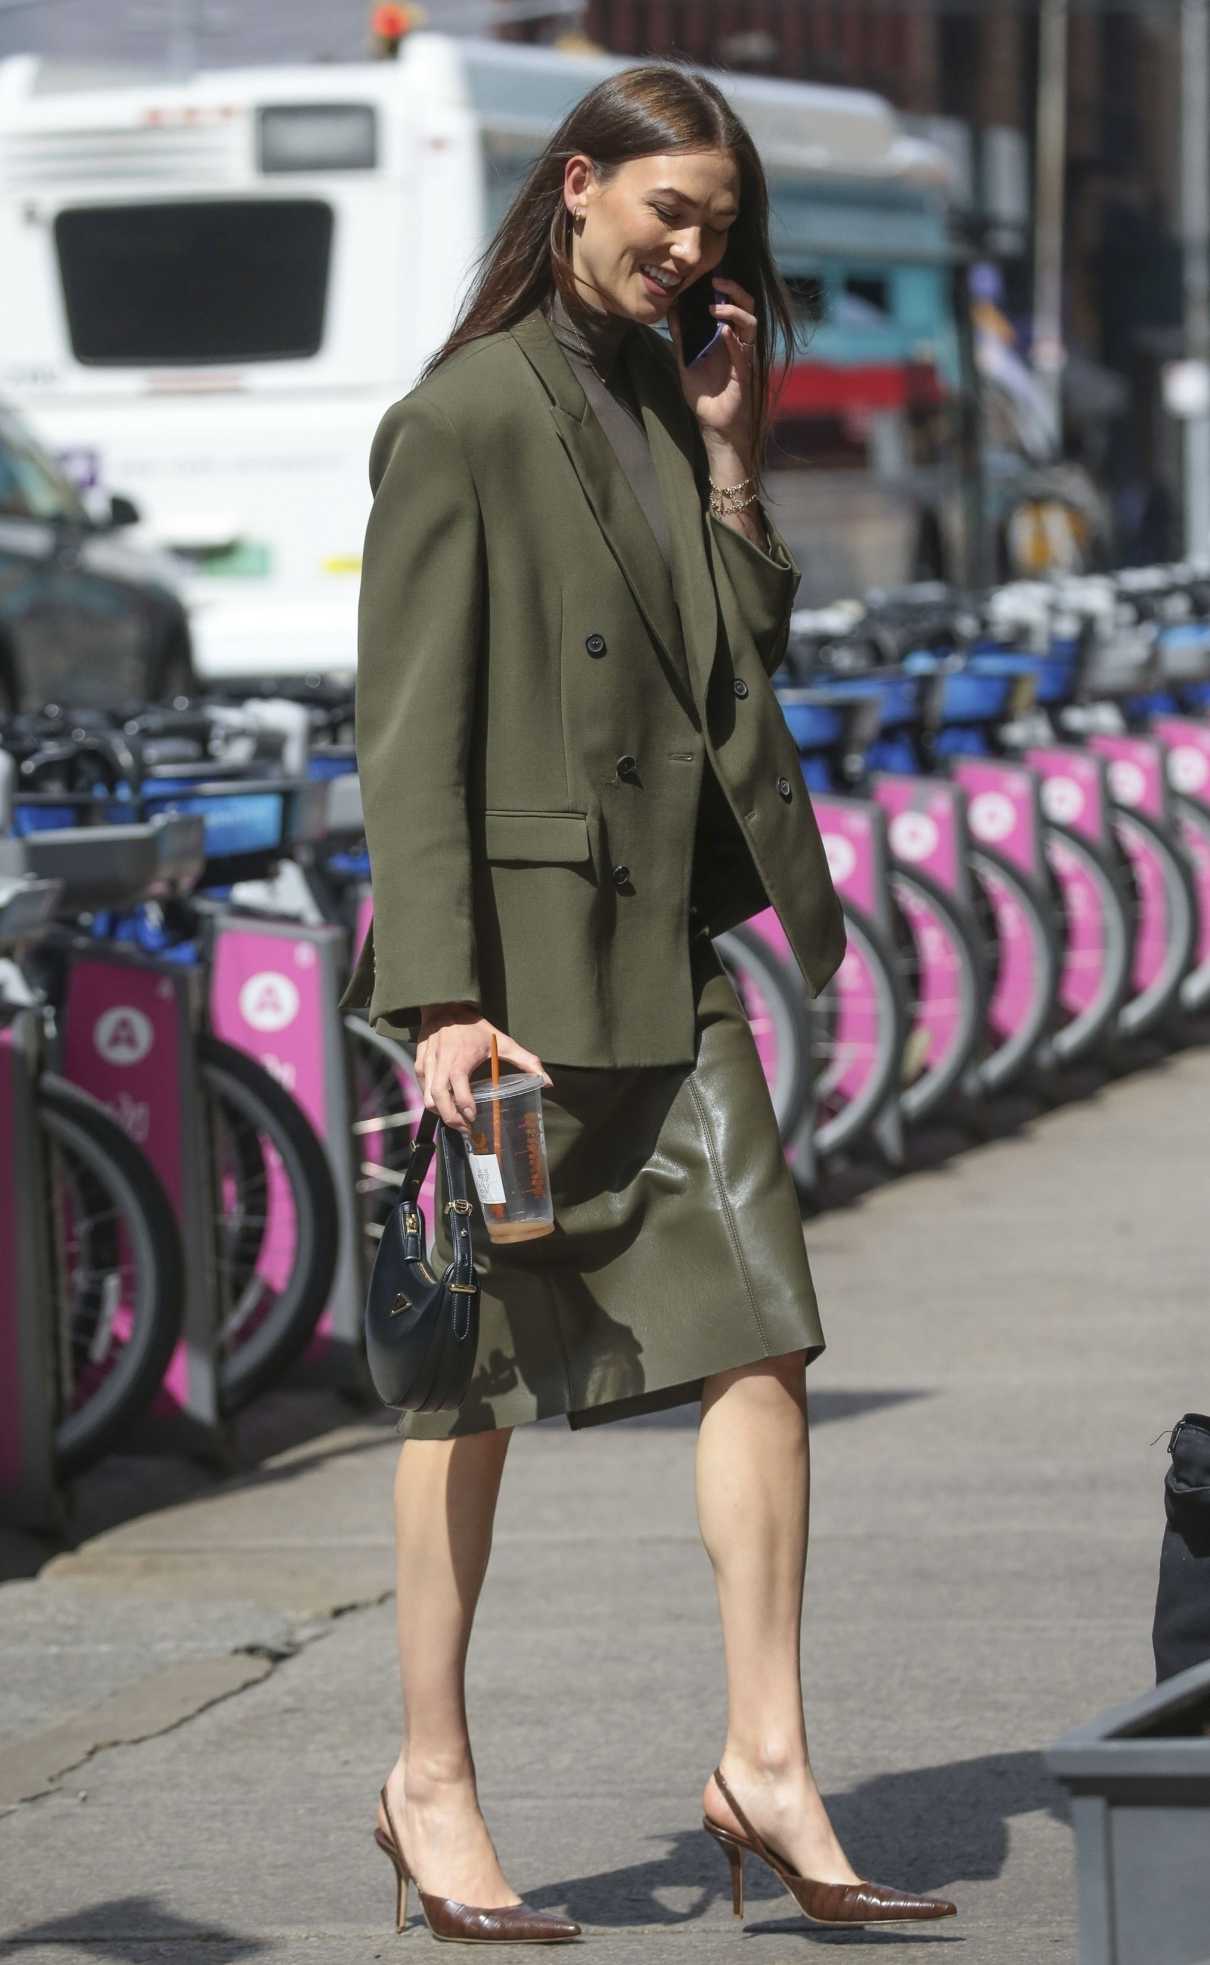 Karlie Kloss in an Olive Blazer Was Seen Out in SoHo in New York City ...